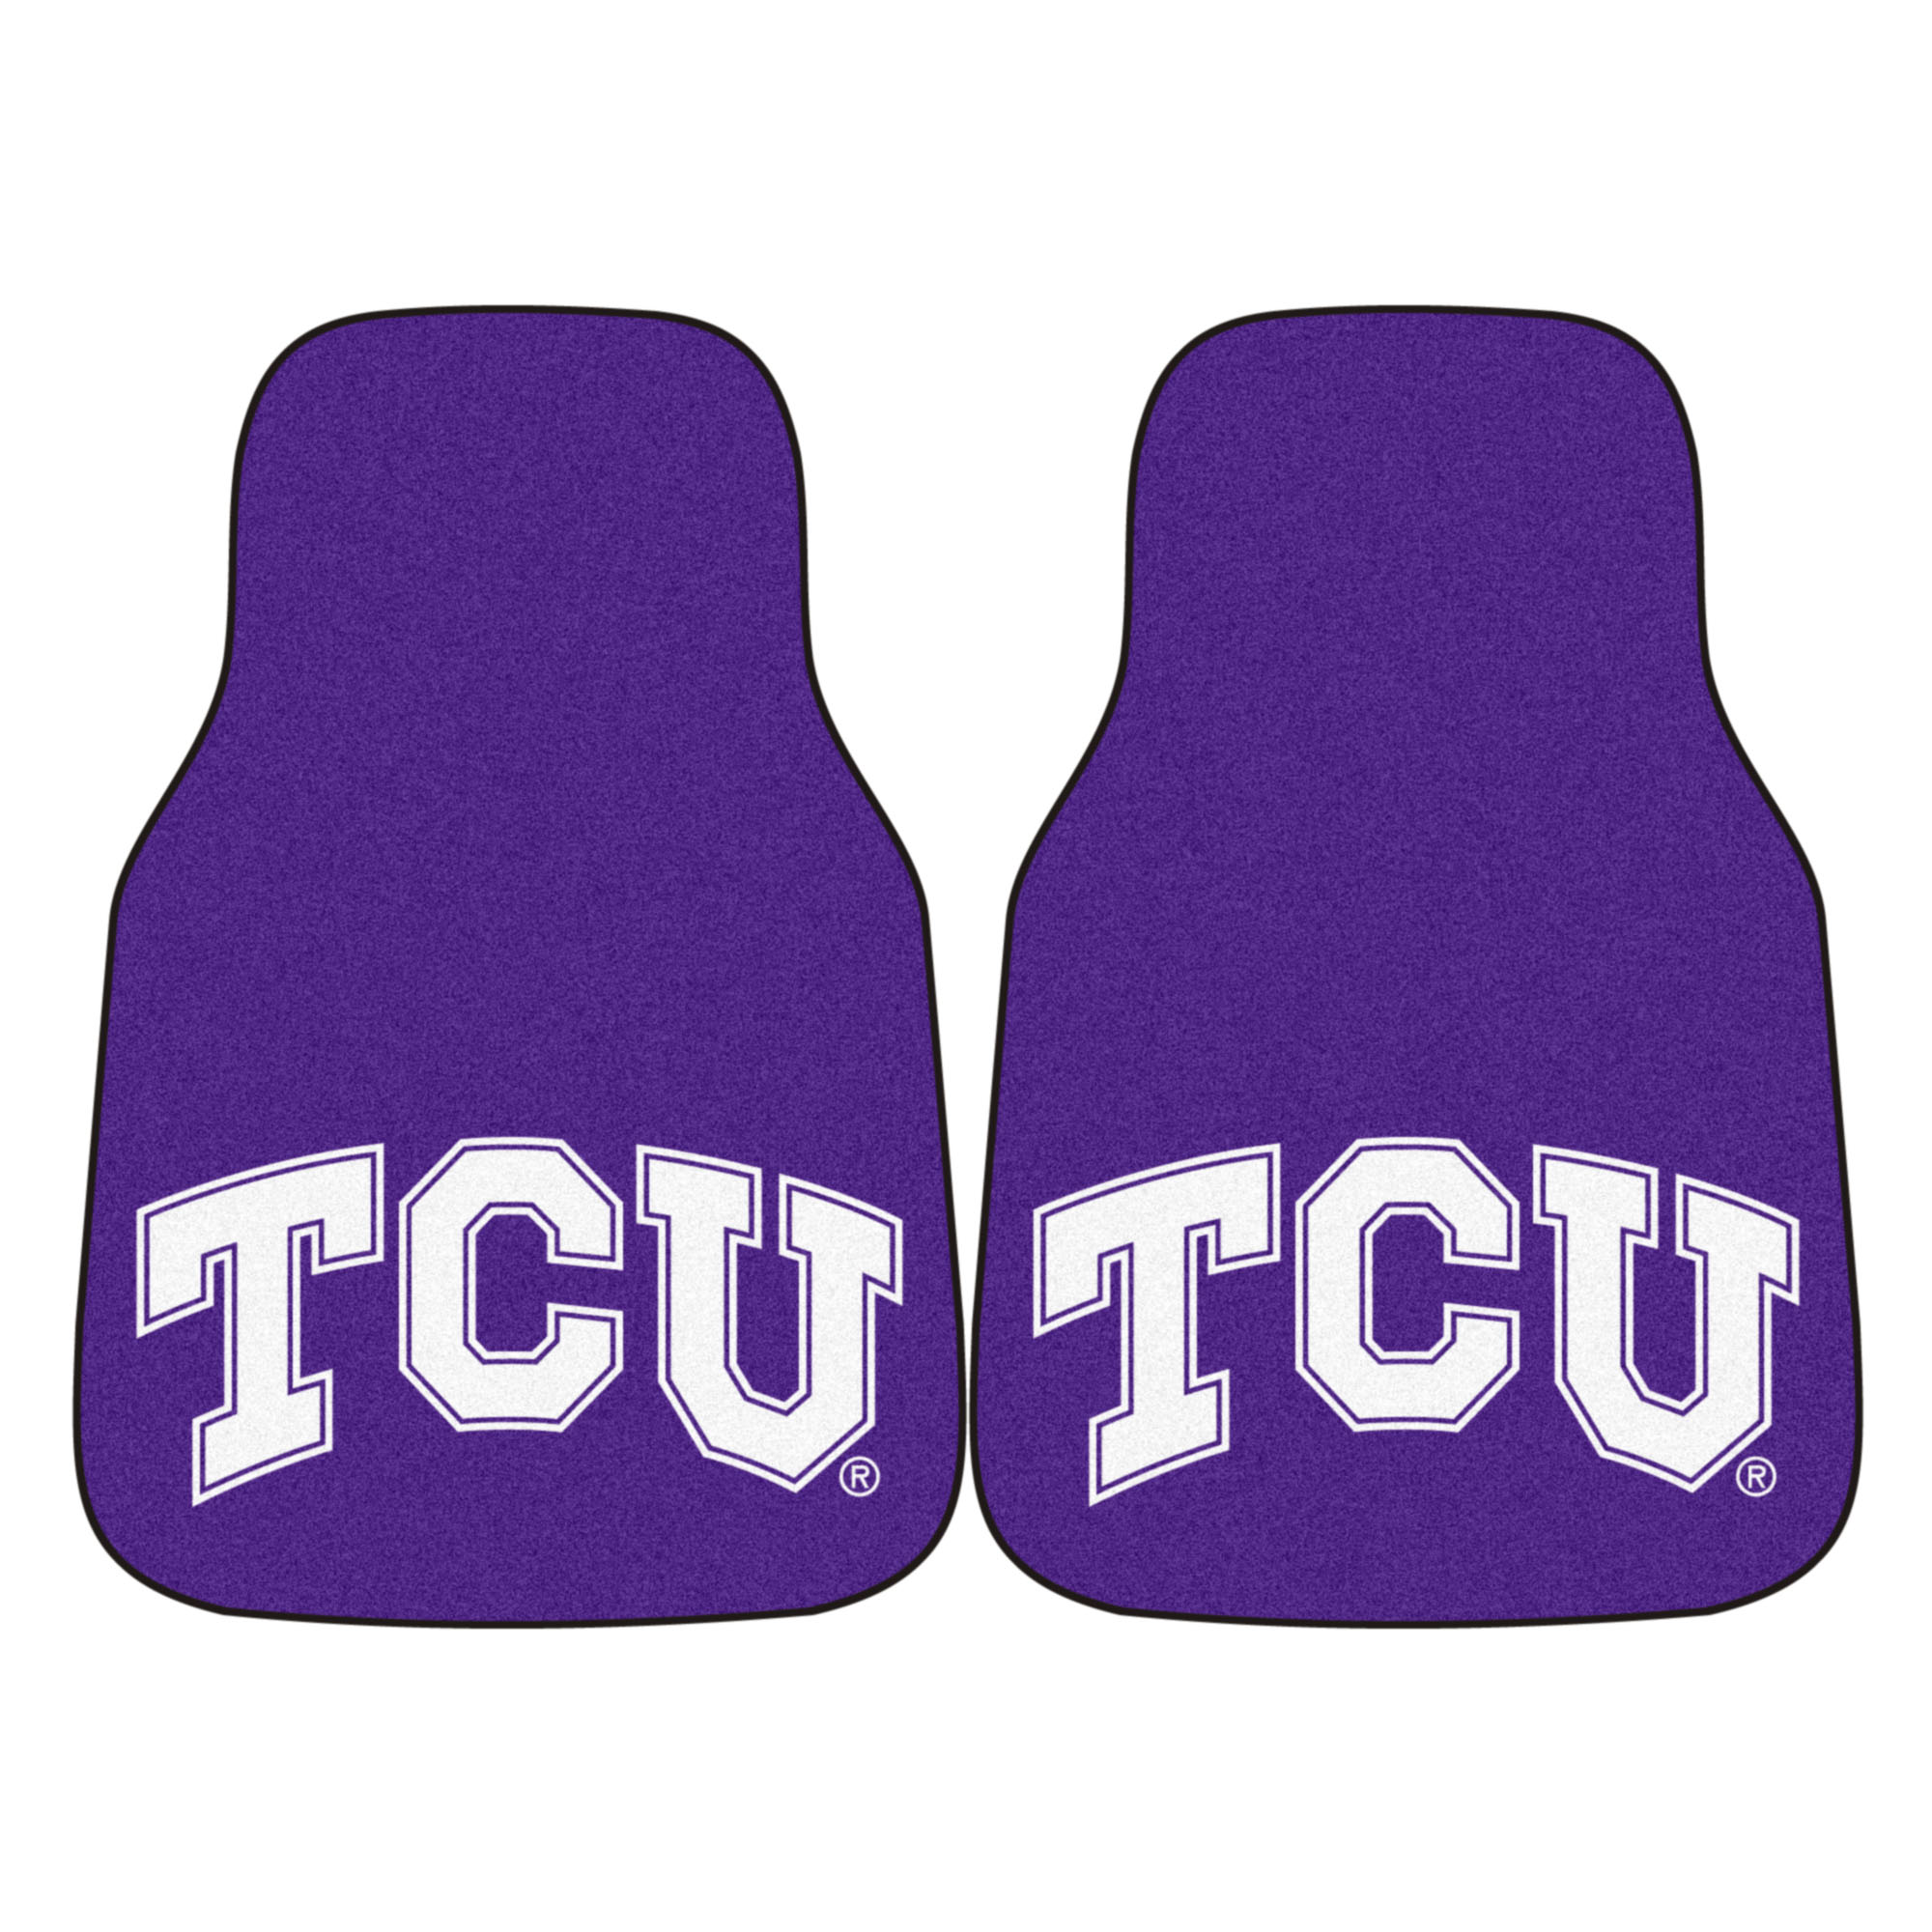 NCAA Texas Christian University Horned Frogs 2-PC Set of Front Carpet Car Mats, Universal Size